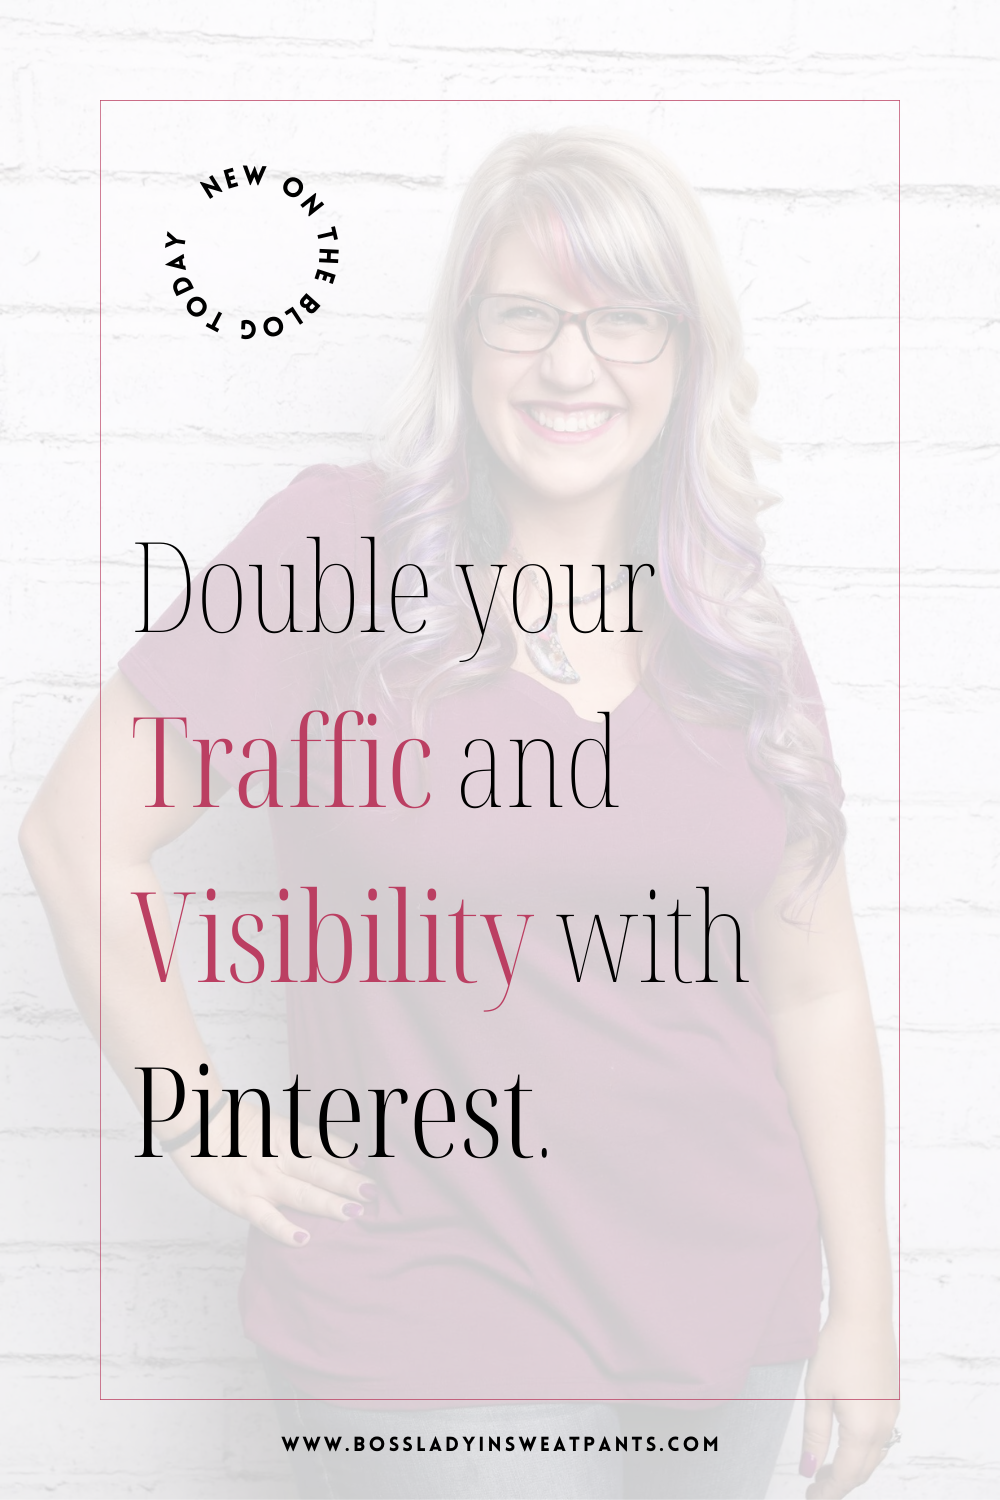 Graphic with woman in the background wearing glasses, text says "Double your traffic and visibility with Pinterest"